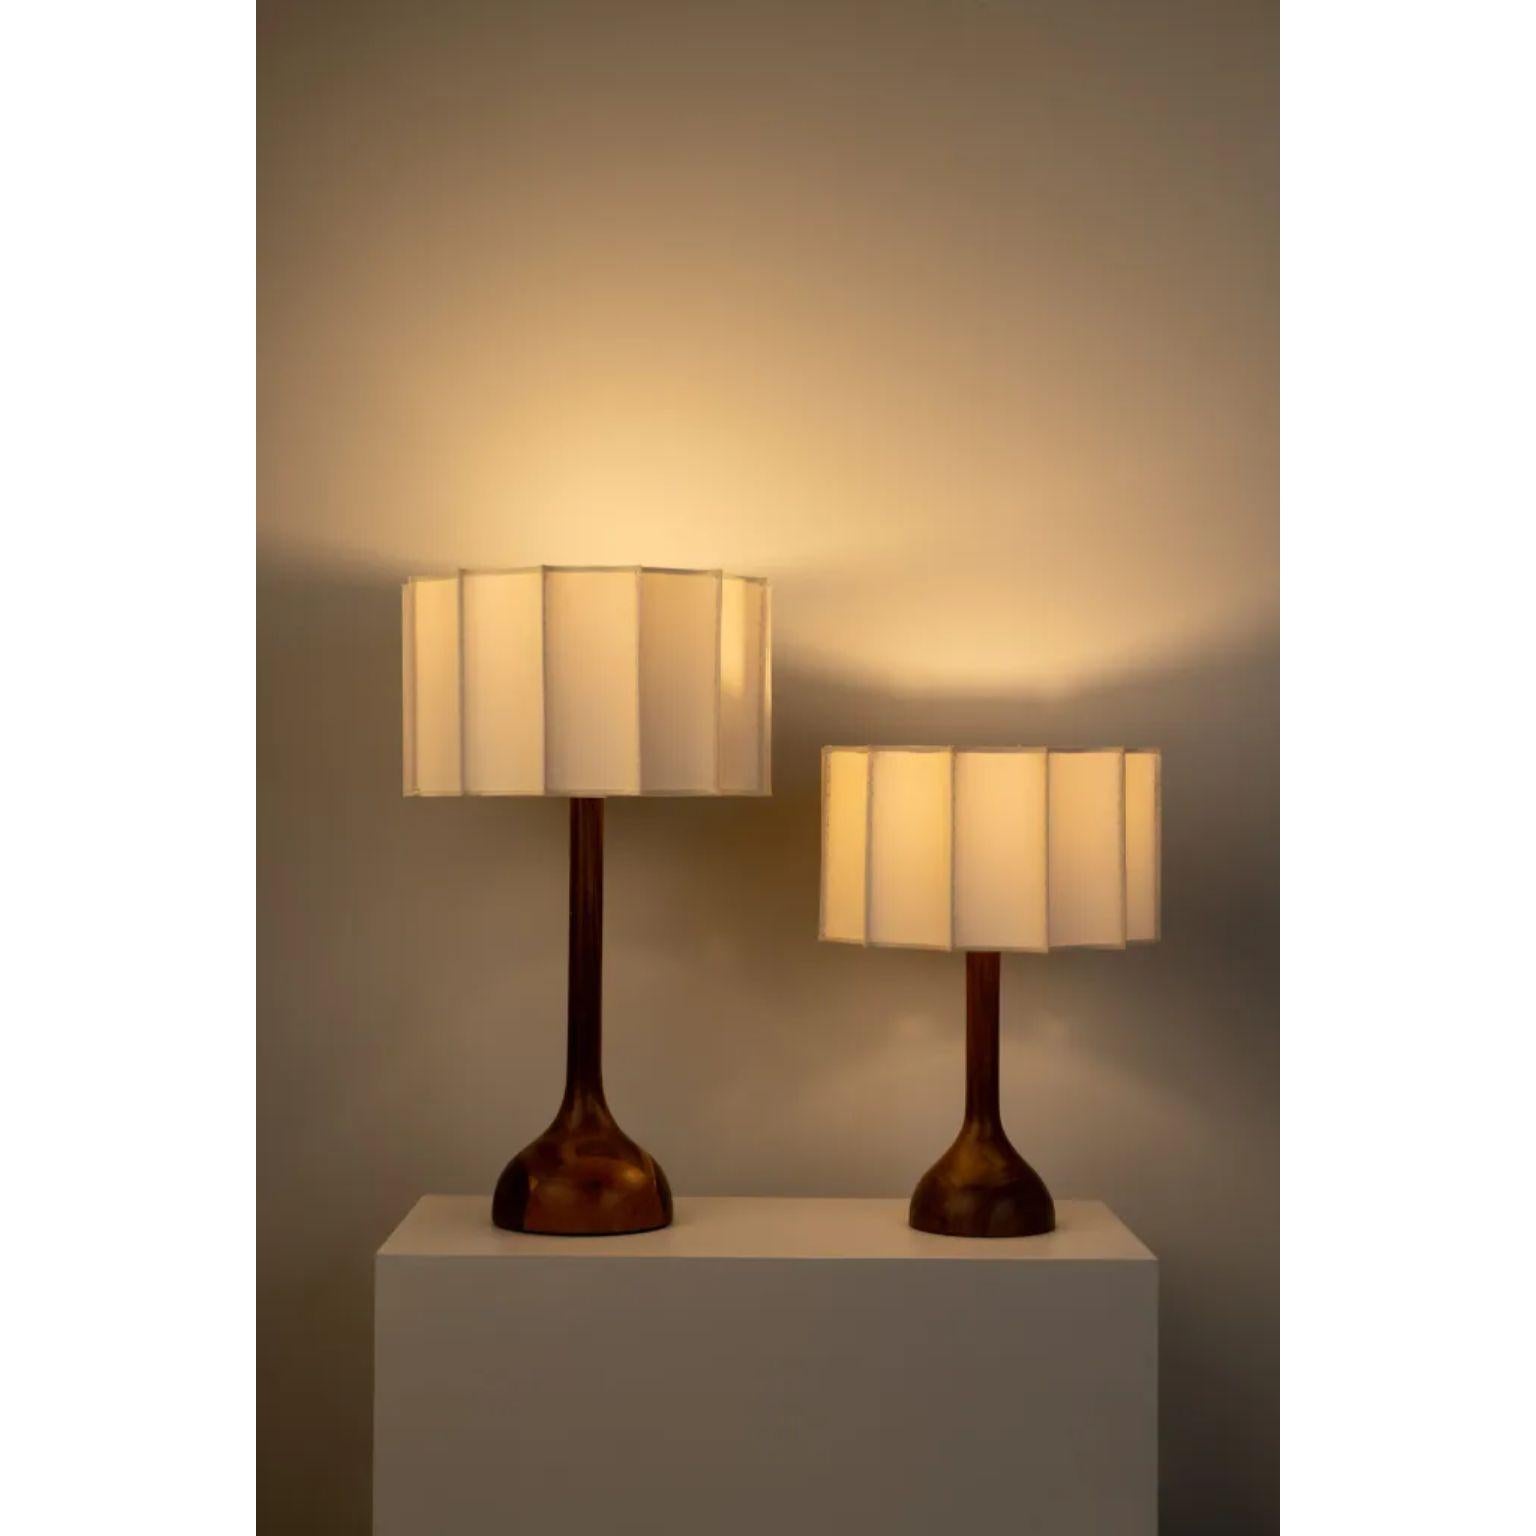 Set of 2 Pata De Elefante Table Lamps by Isabel Moncada
Dimensions: Medium: Ø 53.5 x H 91 cm.
Small: Ø 48.5 x H 74 cm.
Materials: Turned parota wood base and fabric-lined lampshade with fiberglass and polystyrene.

Named Pata de Elefante –Elephant‘s